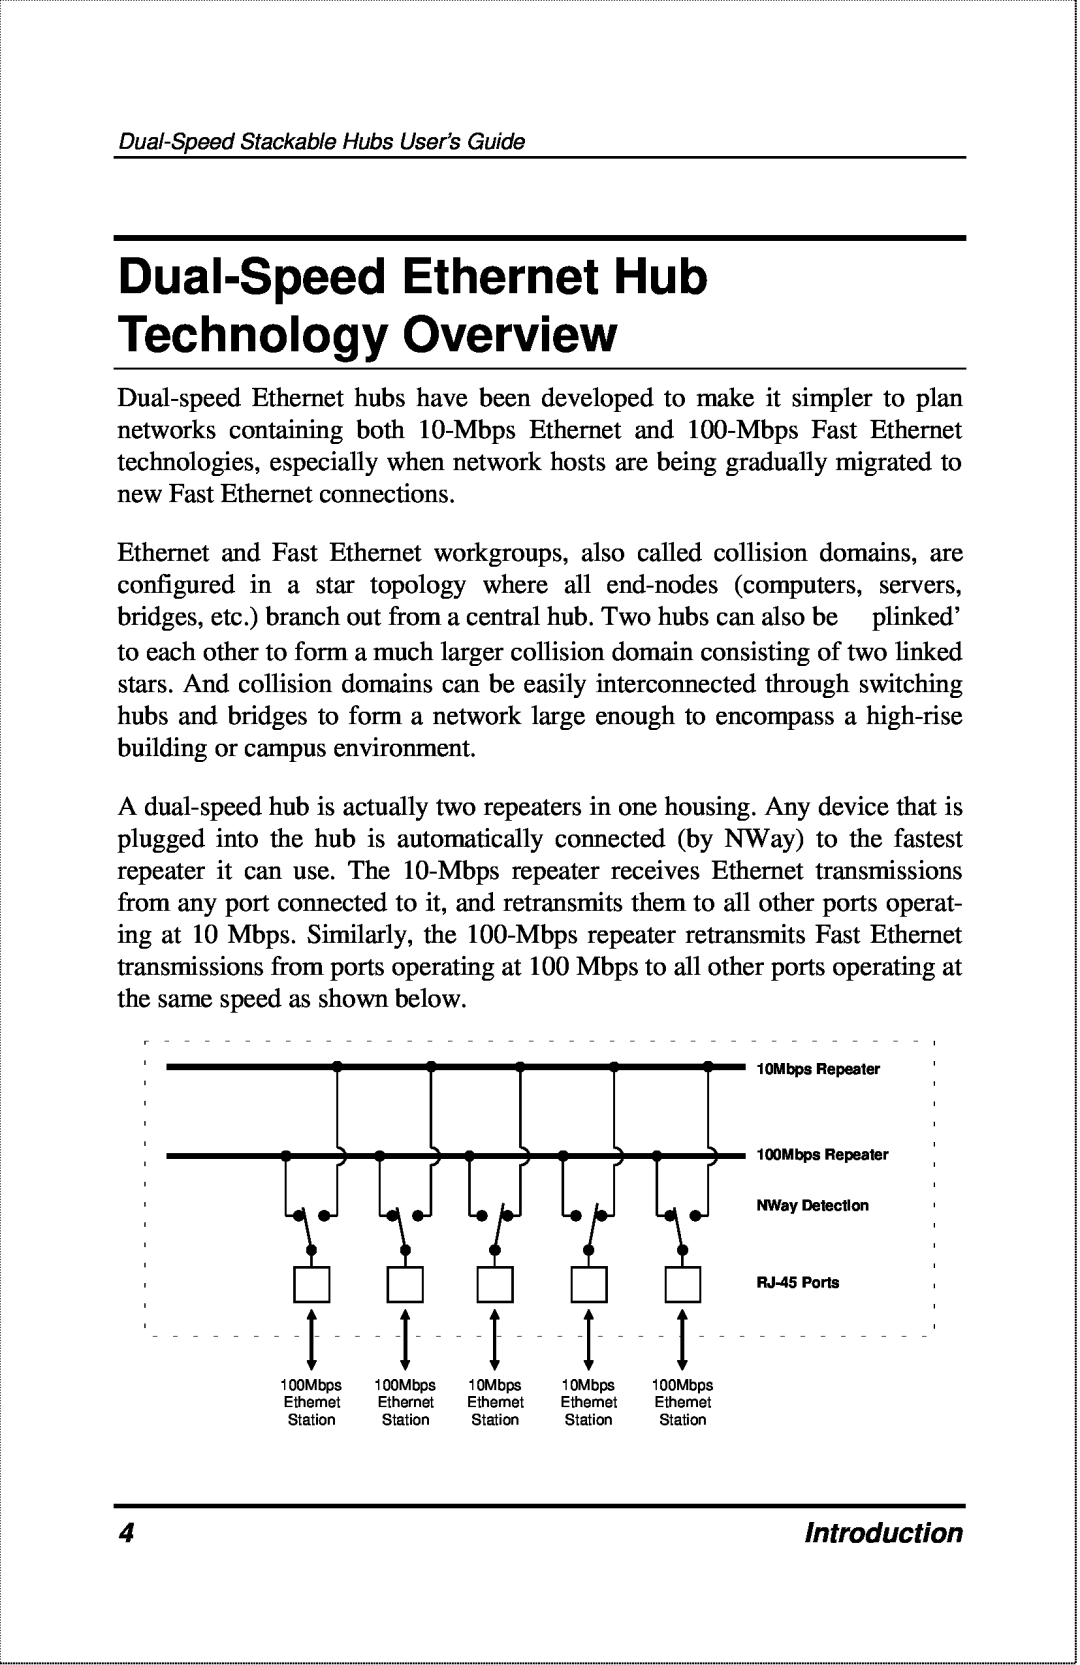 D-Link DFE-2600 manual Dual-Speed Ethernet Hub Technology Overview, Introduction 